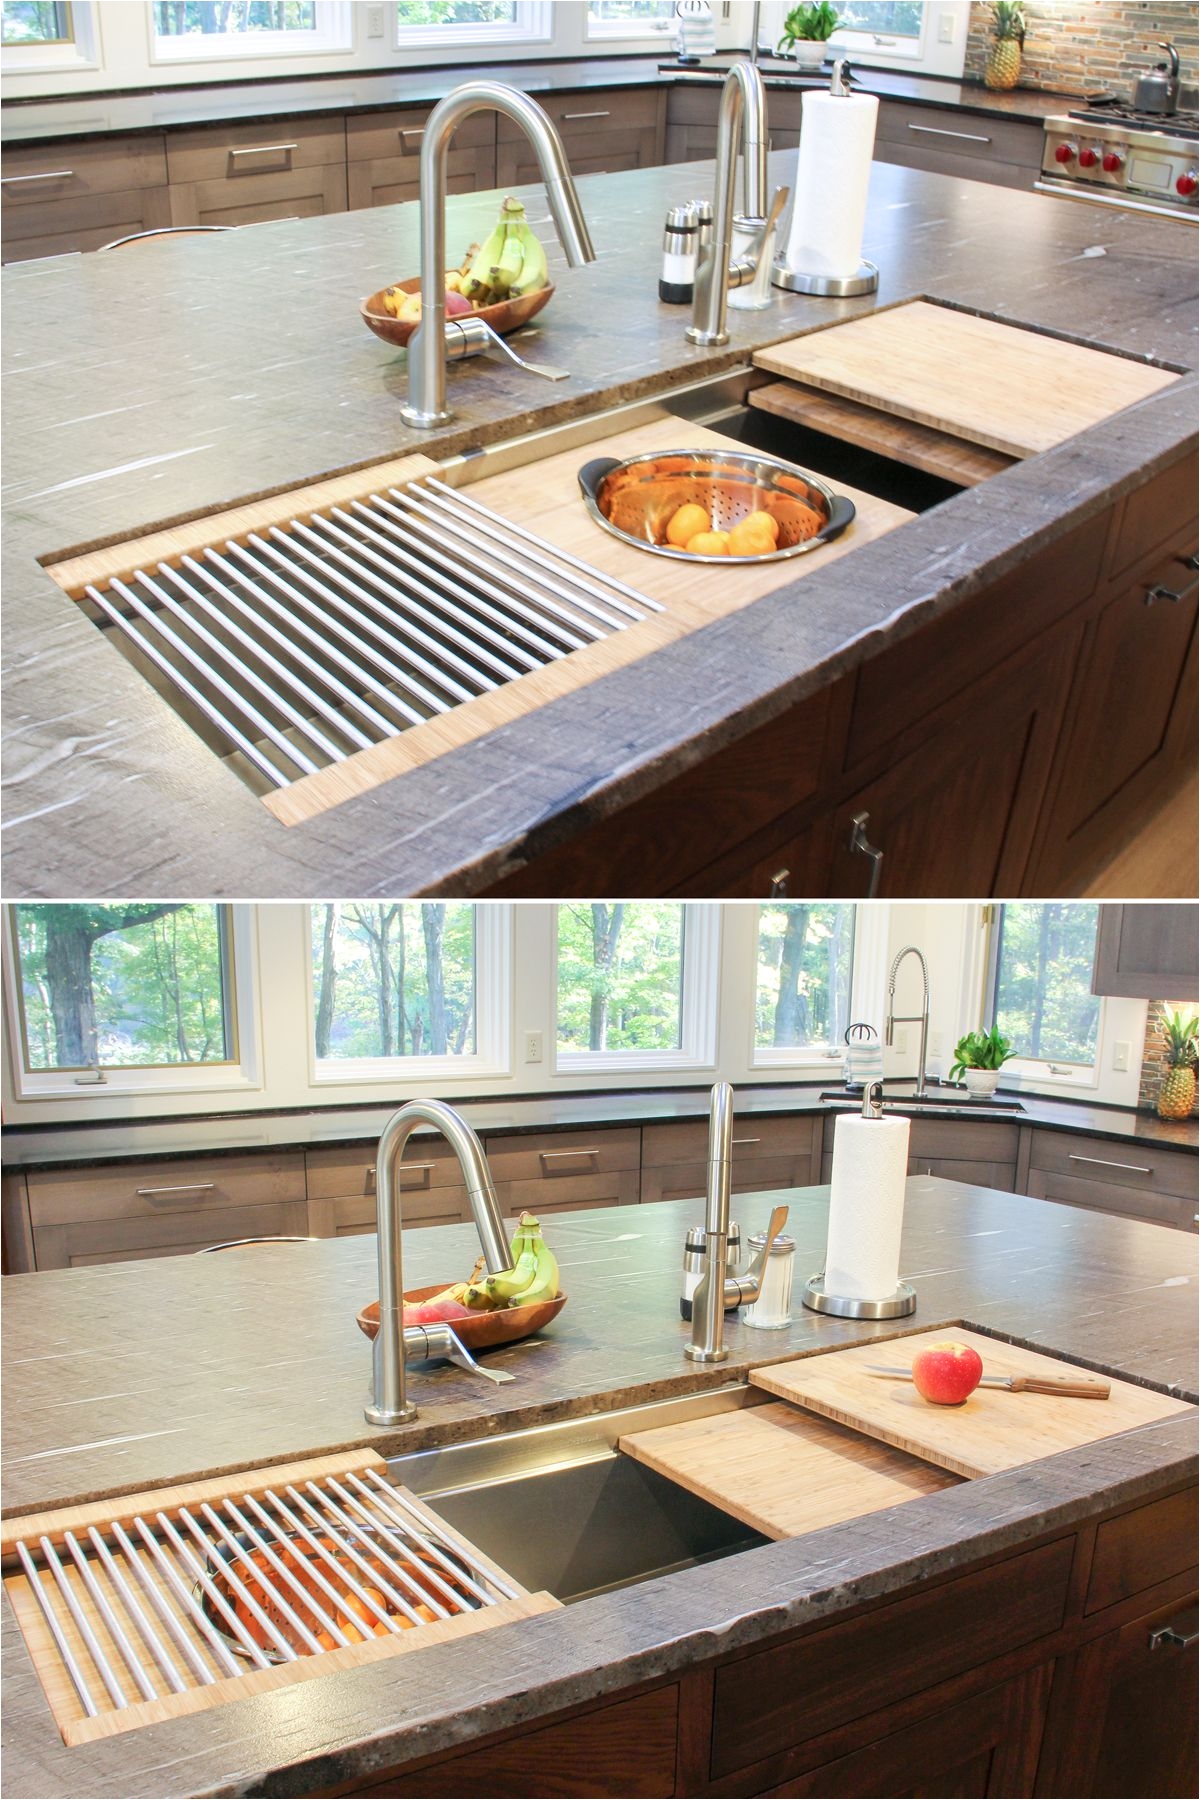 kitchen island sink with cutting boards colander and dish drying rack custom cabinetry by bremtown cabinetry galleysink